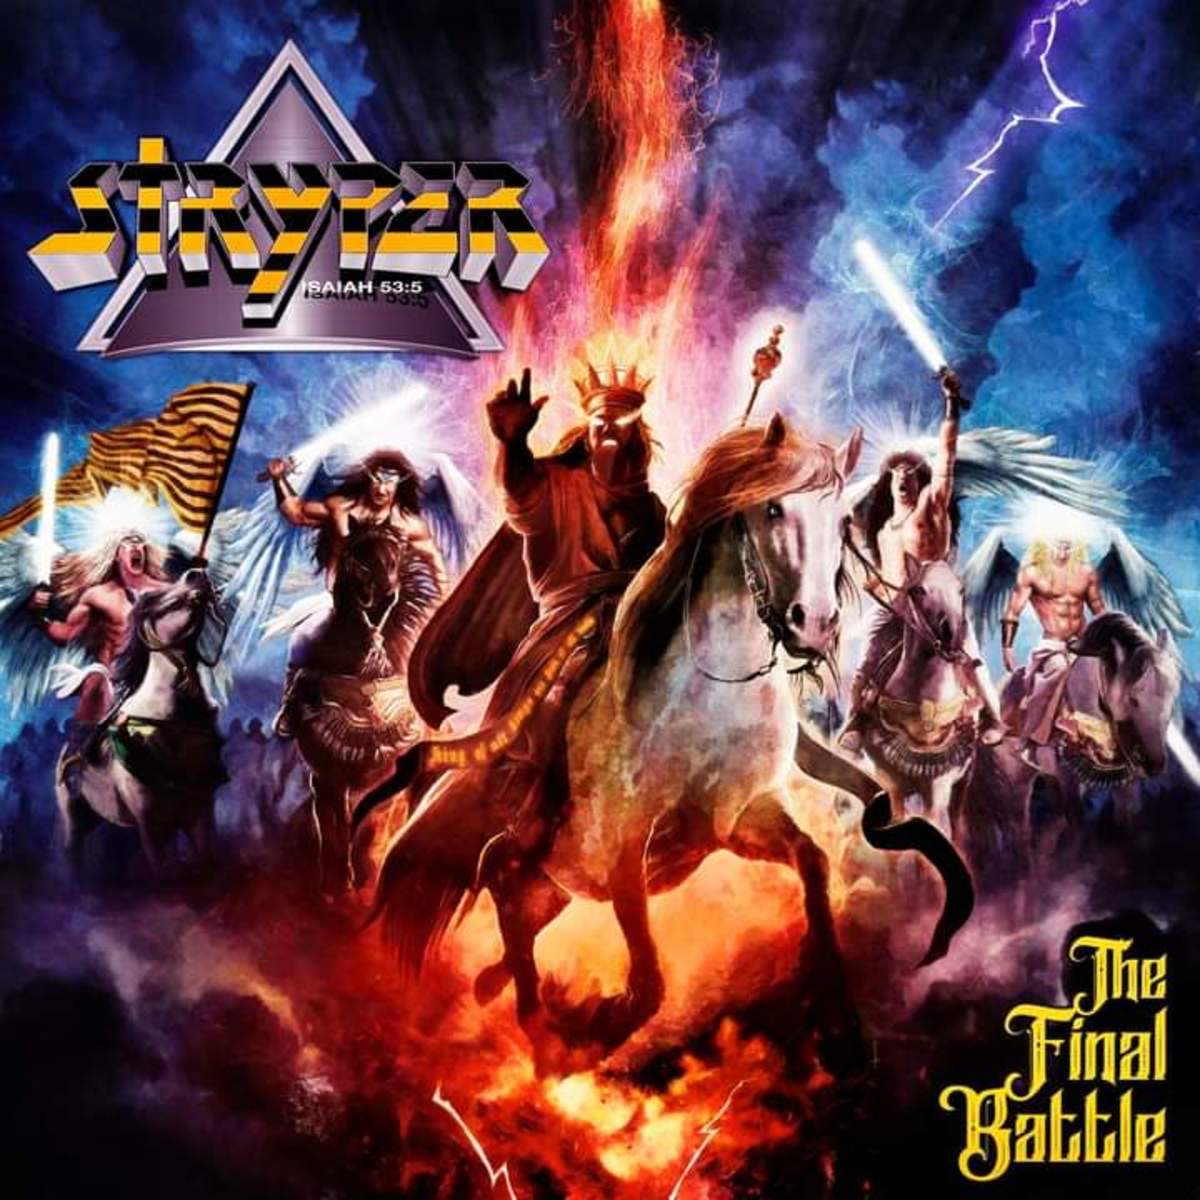 25 Fascinating Facts About Stryper